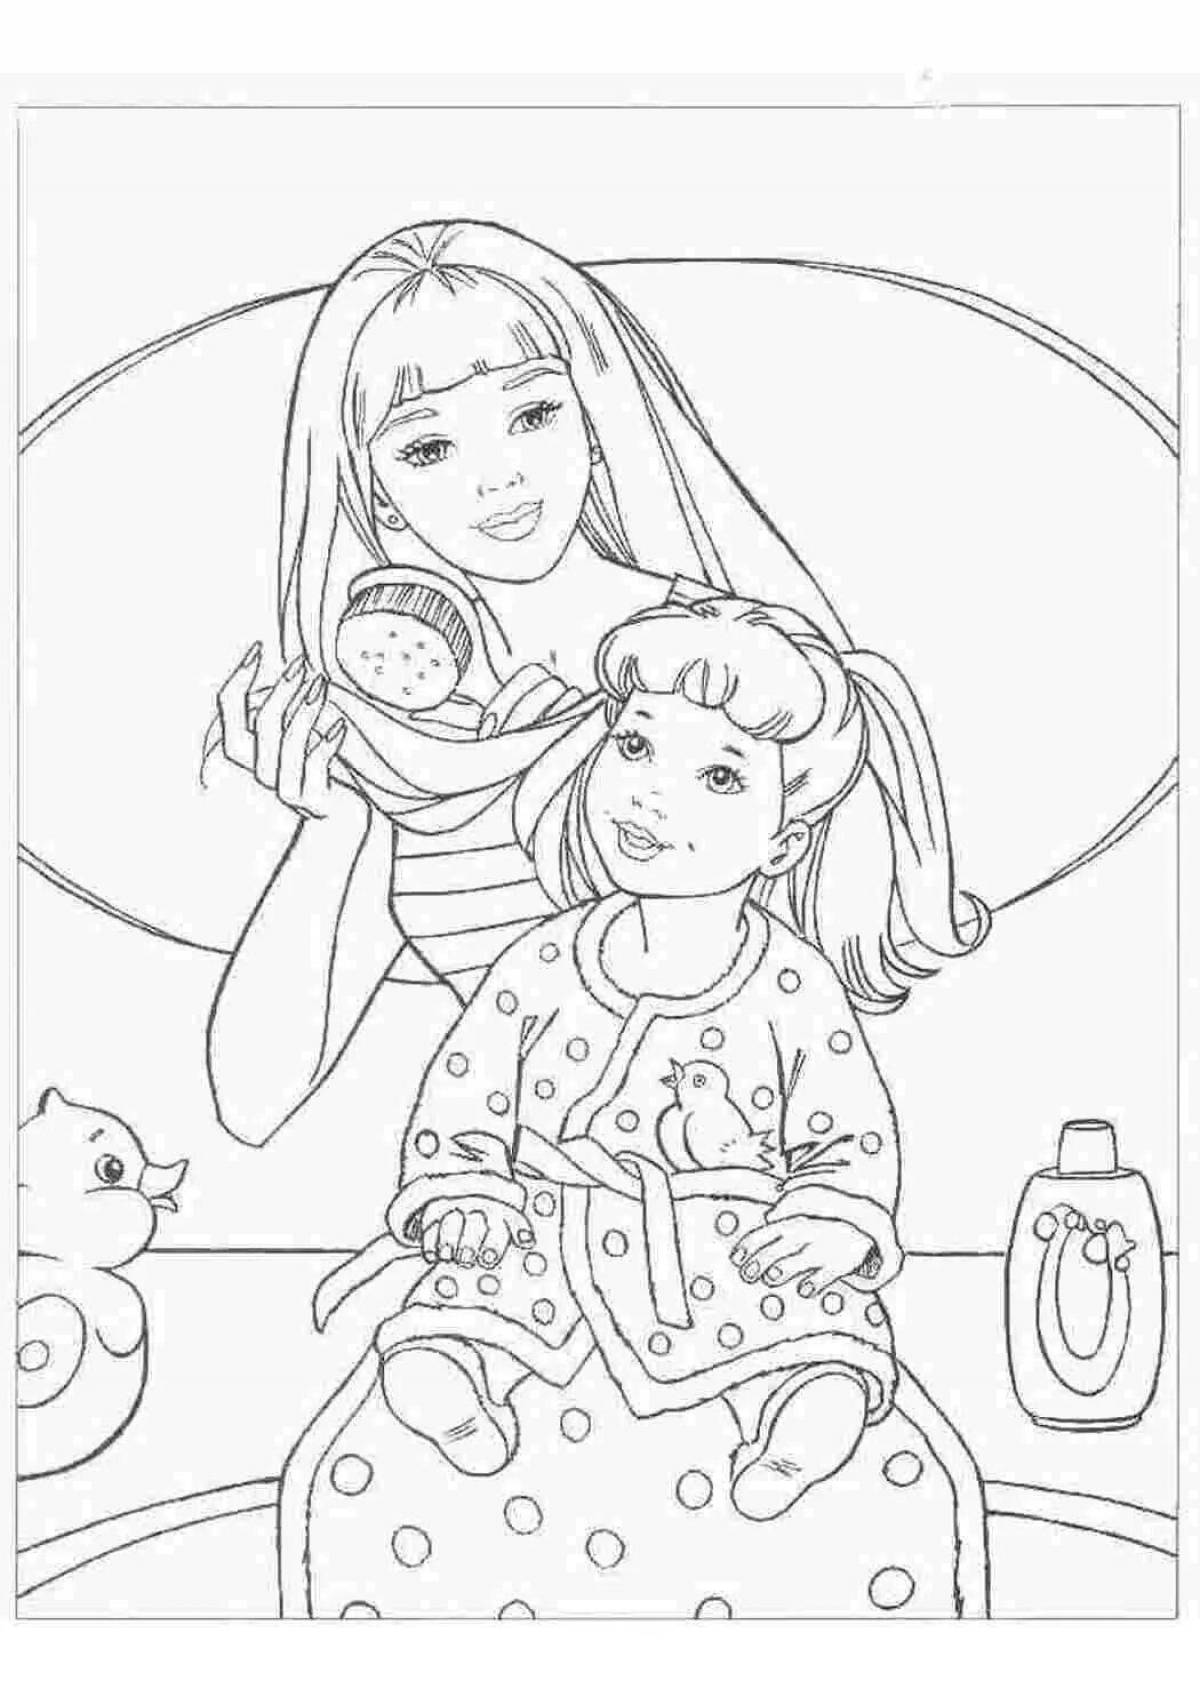 Amazing mommy coloring book